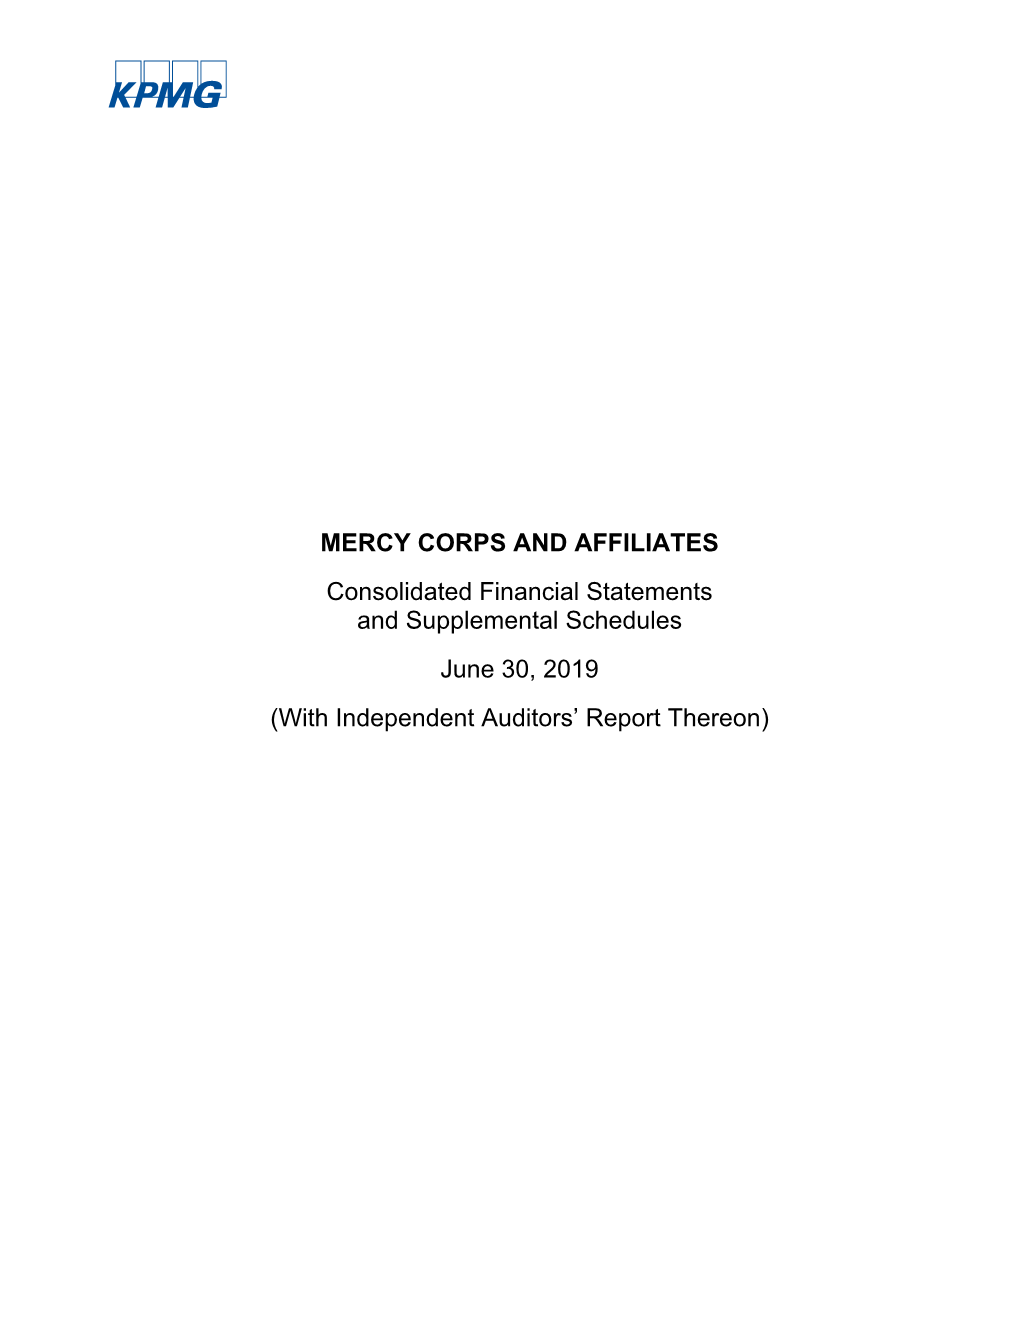 MERCY CORPS and AFFILIATES Consolidated Financial Statements and Supplemental Schedules June 30, 2019 (With Independent Auditors’ Report Thereon)